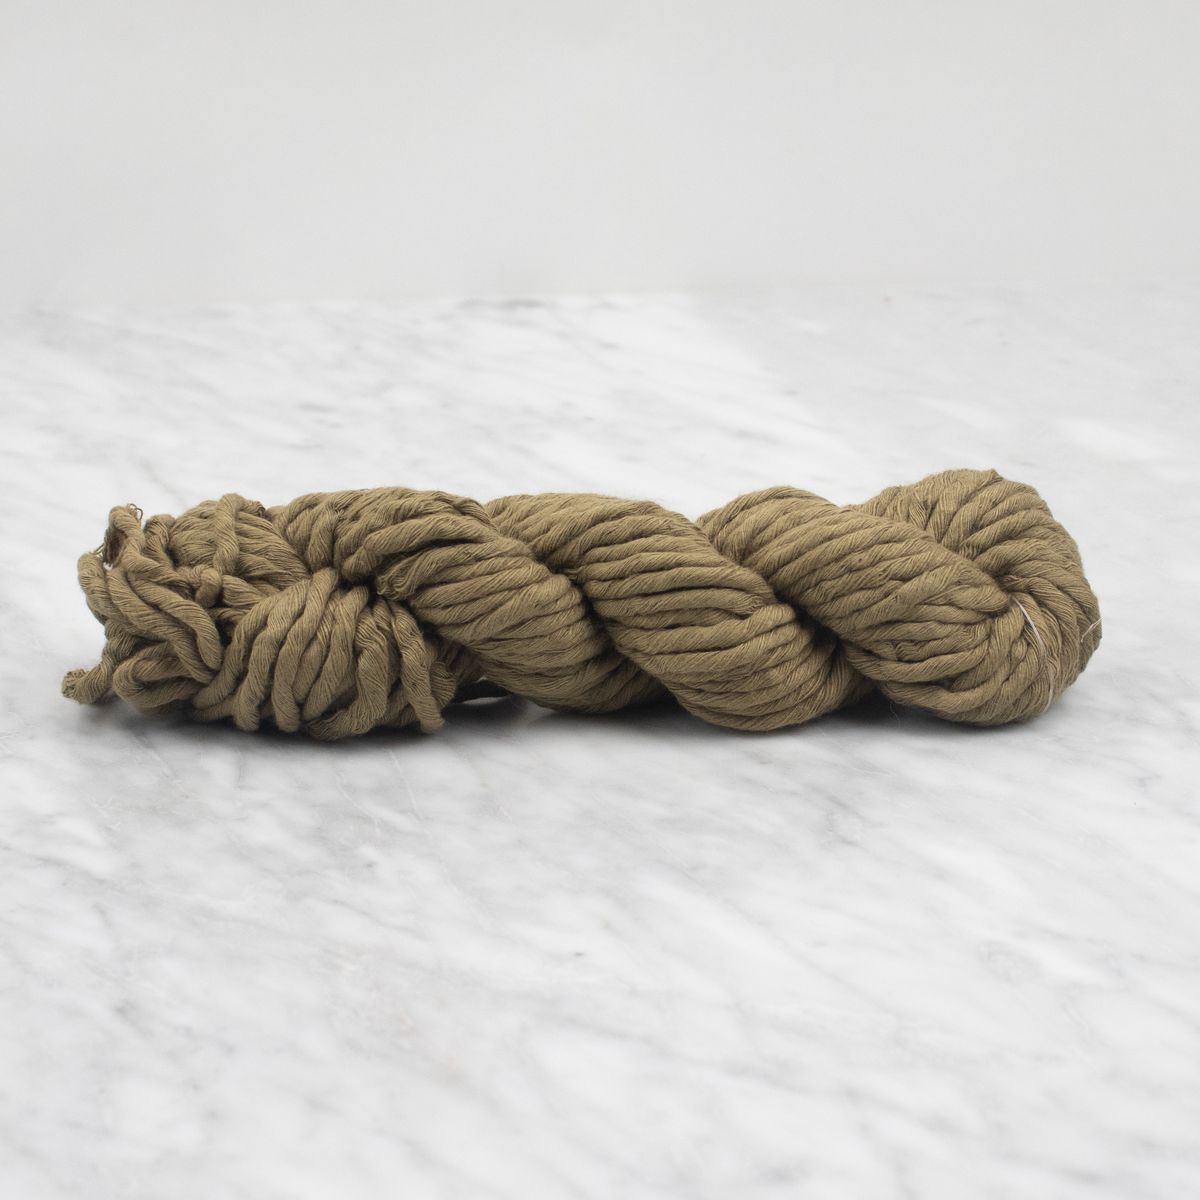 5mm Hand-Dyed Cotton String - Sage Green - 100 grams